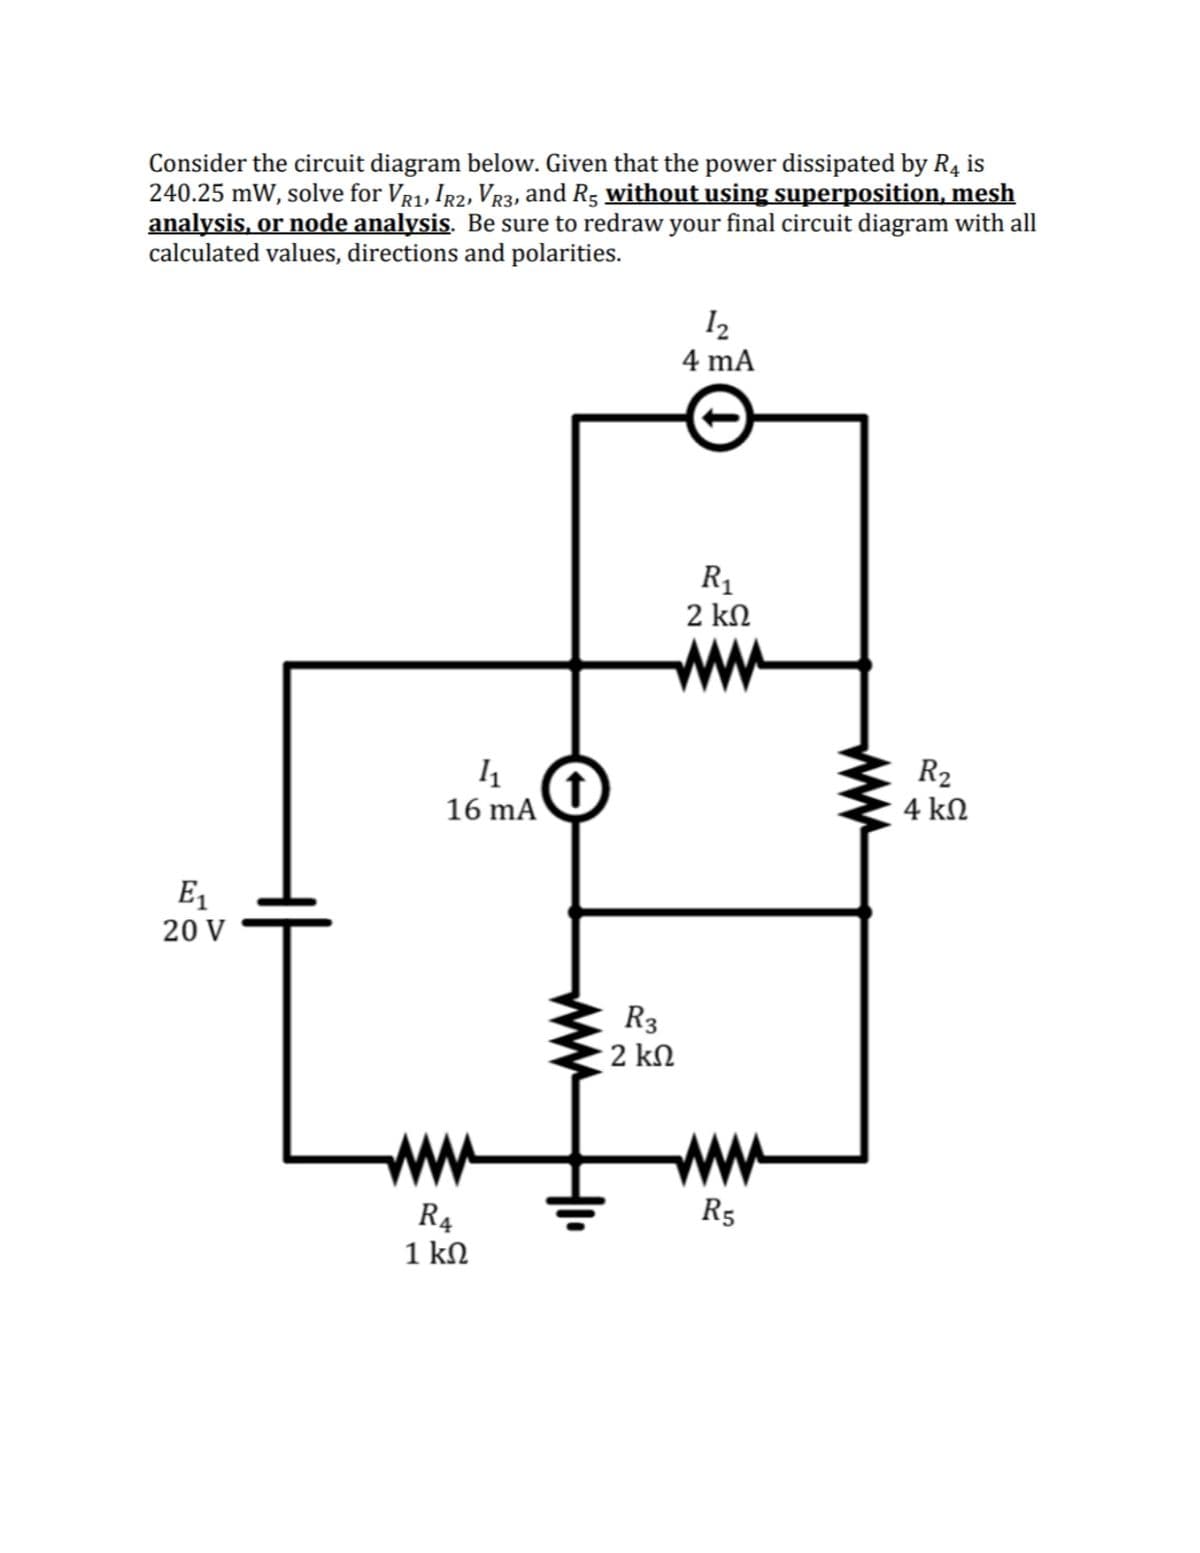 Consider the circuit diagram below. Given that the power dissipated by R4 is
240.25 mW, solve for Vr1, Ig2, Vr3, and R5 without using superposition, mesh
analysis, or node analysis. Be sure to redraw your final circuit diagram with all
calculated values, directions and polarities.
12
4 mA
R1
2 kN
ww
R2
4 kN
16 mA
E1
20 V
R3
2 kN
ww
ww
R5
R4
1 kN
ww
ww
